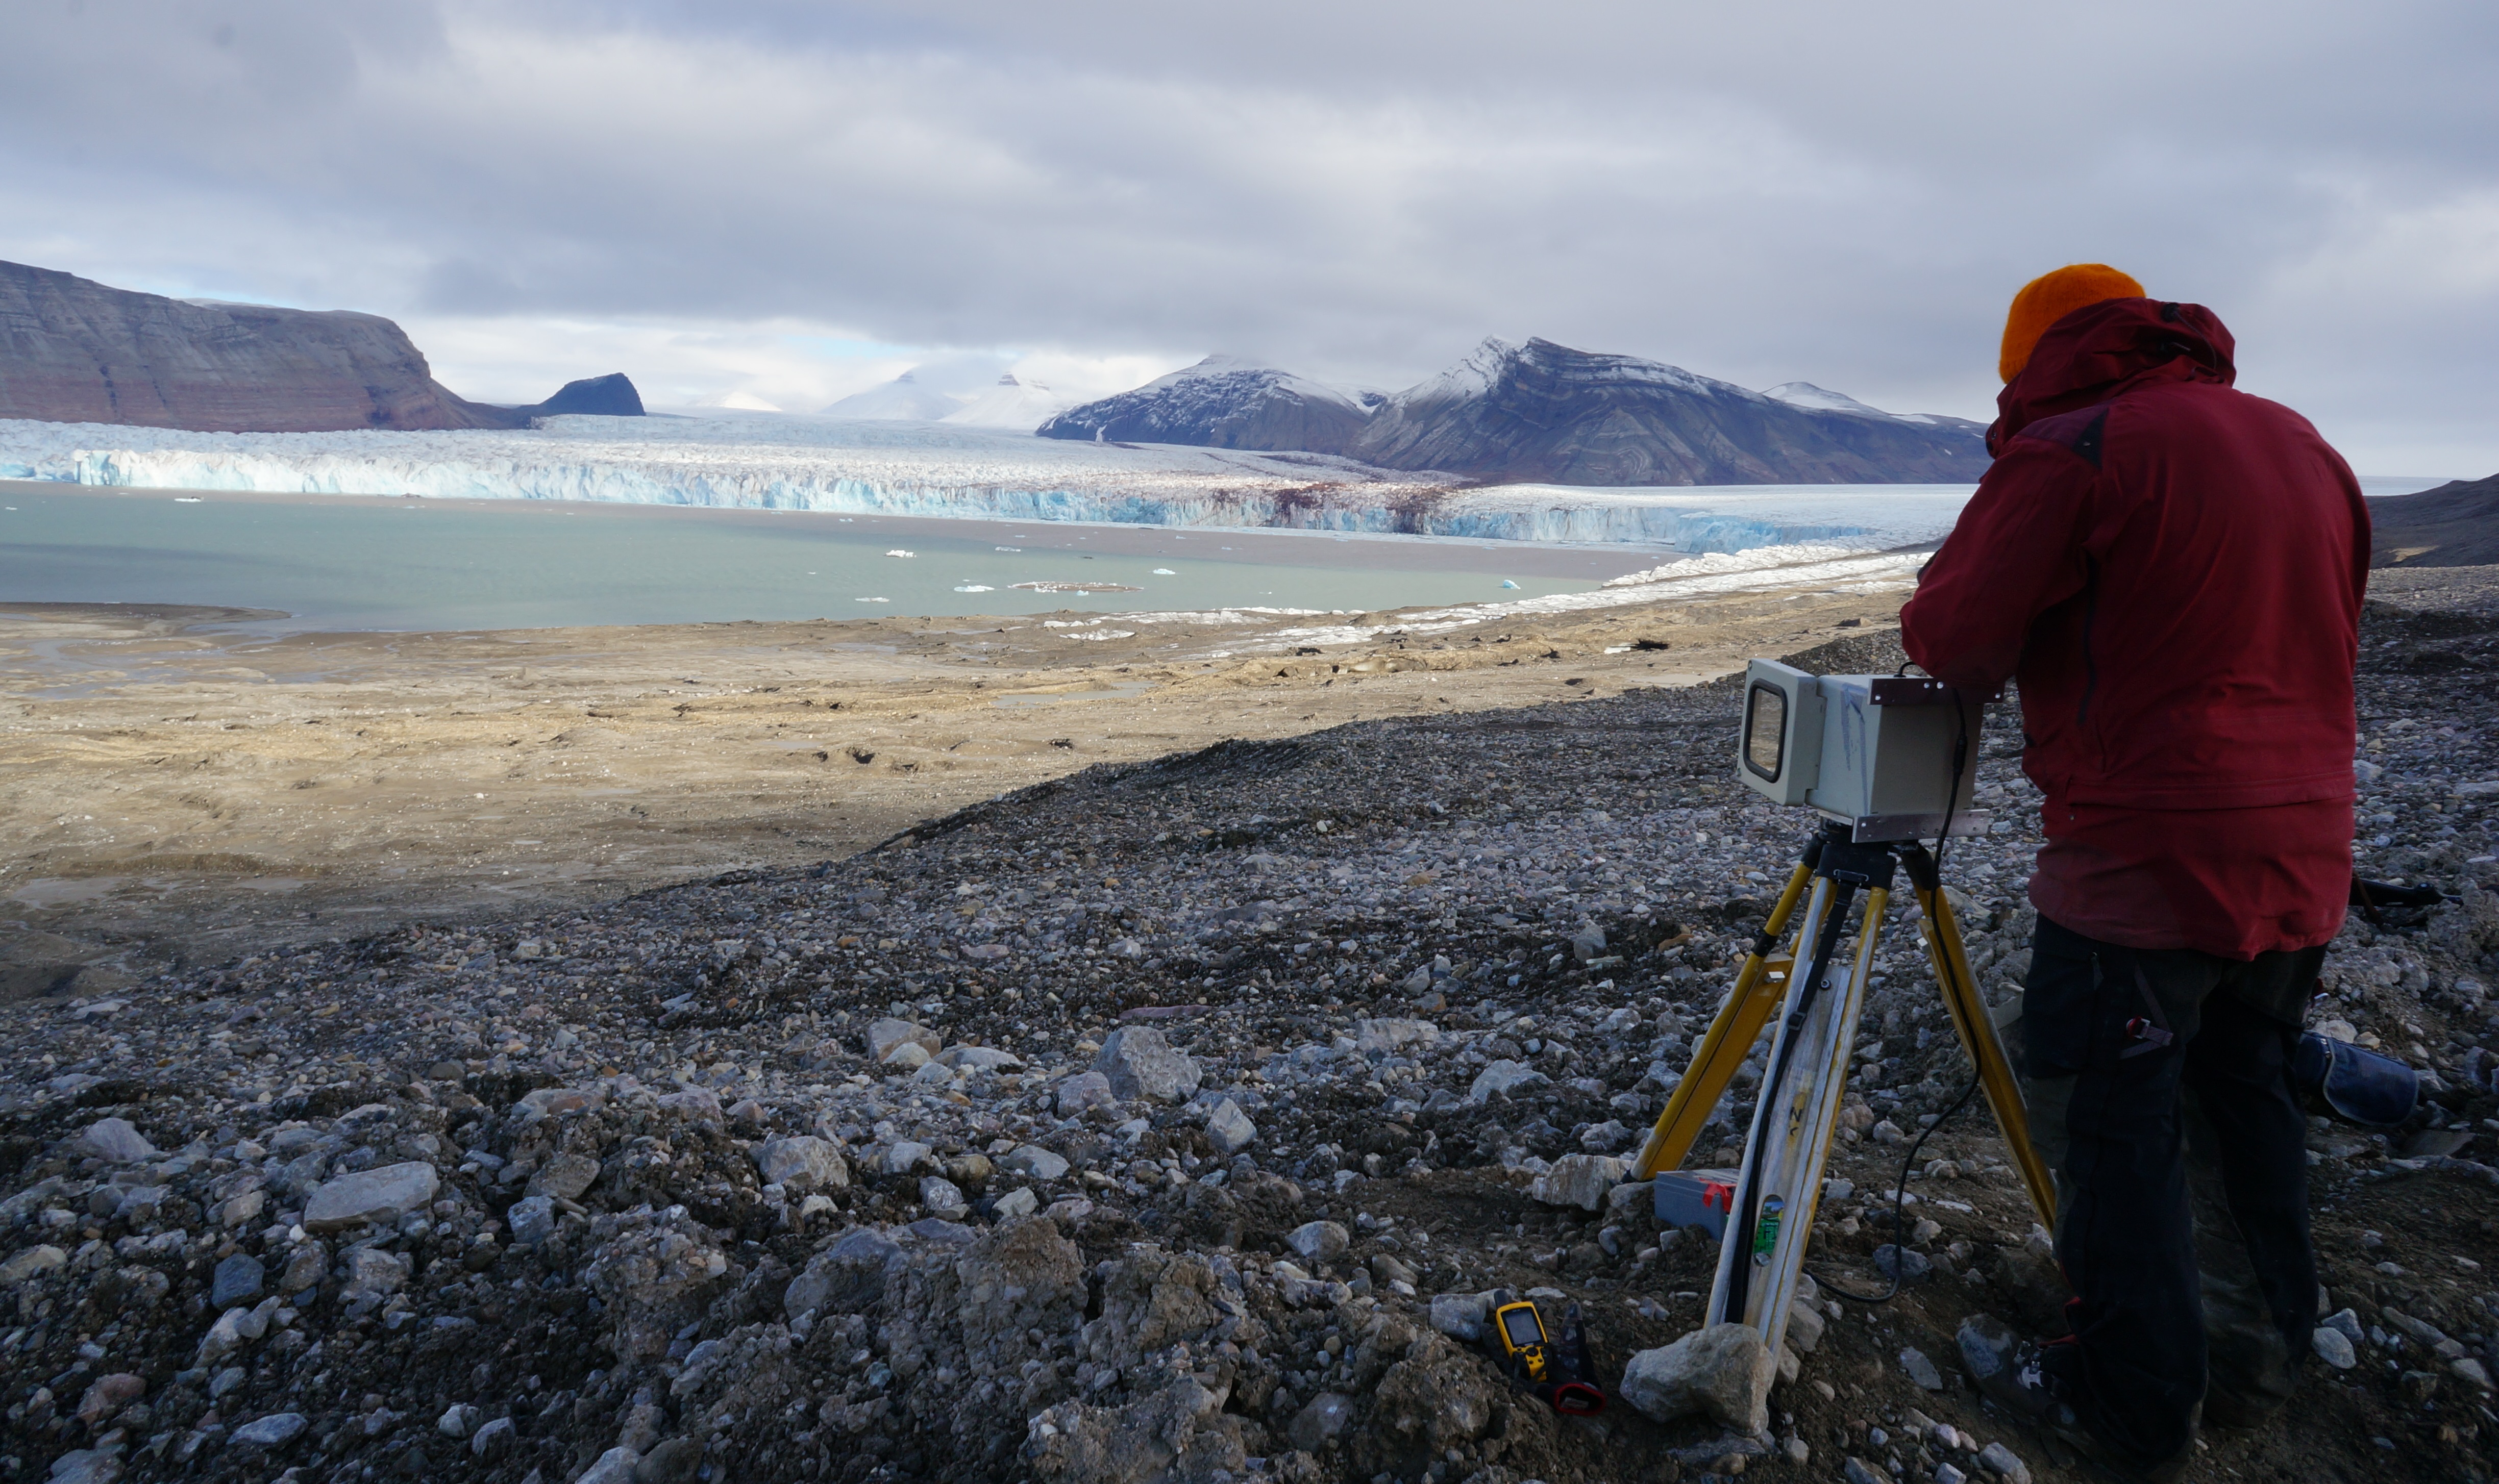 PiM (Pierre-Marie Lefeuvre, UiO) and I setting up one of the time-lapse cameras high up on the moraine to capture calving events at Kronebreen glacier. These cameras were capturing images every three seconds (August 2016)